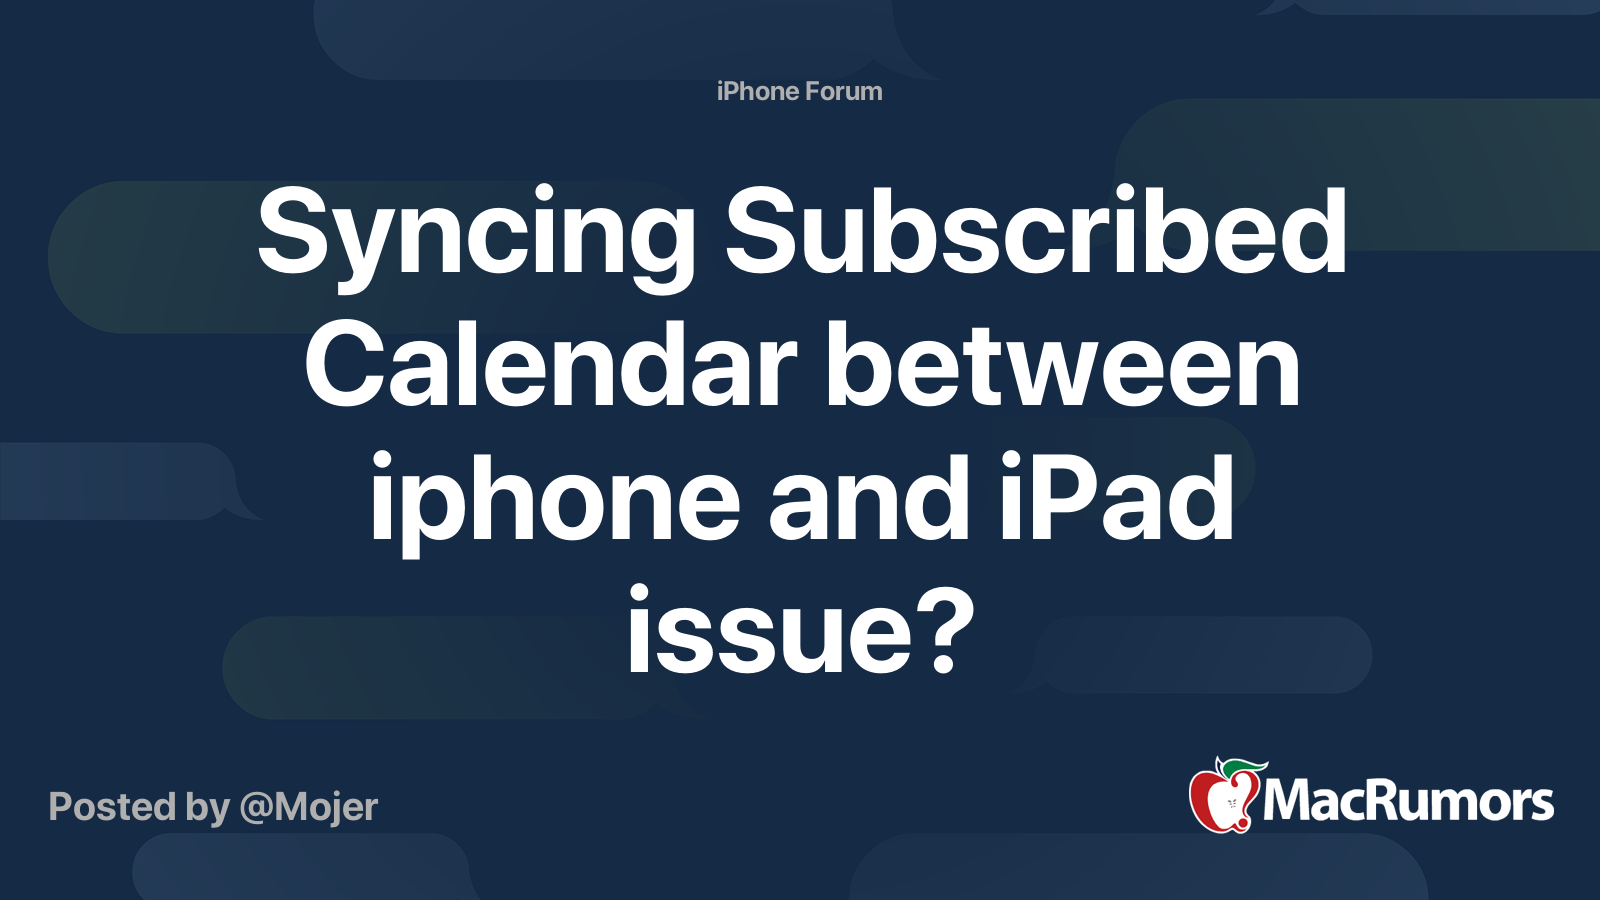 Syncing Subscribed Calendar between iphone and iPad issue? MacRumors